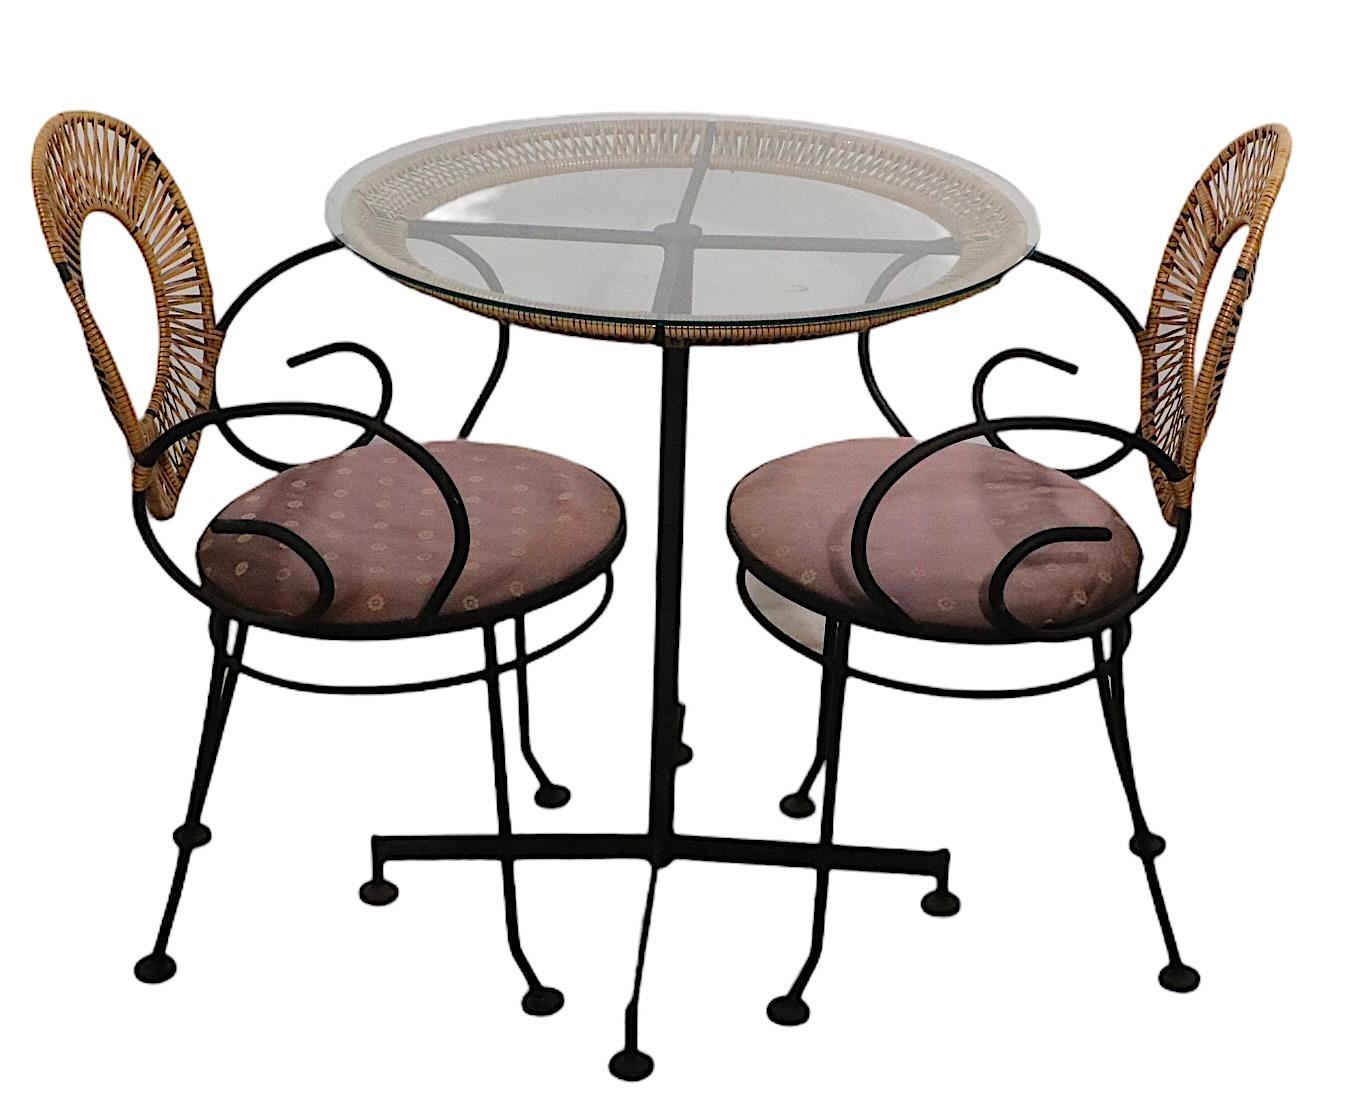 American Mid Century Cafe Dinette Set Inc. Table and Two Chairs Attributed to Umanoff For Sale